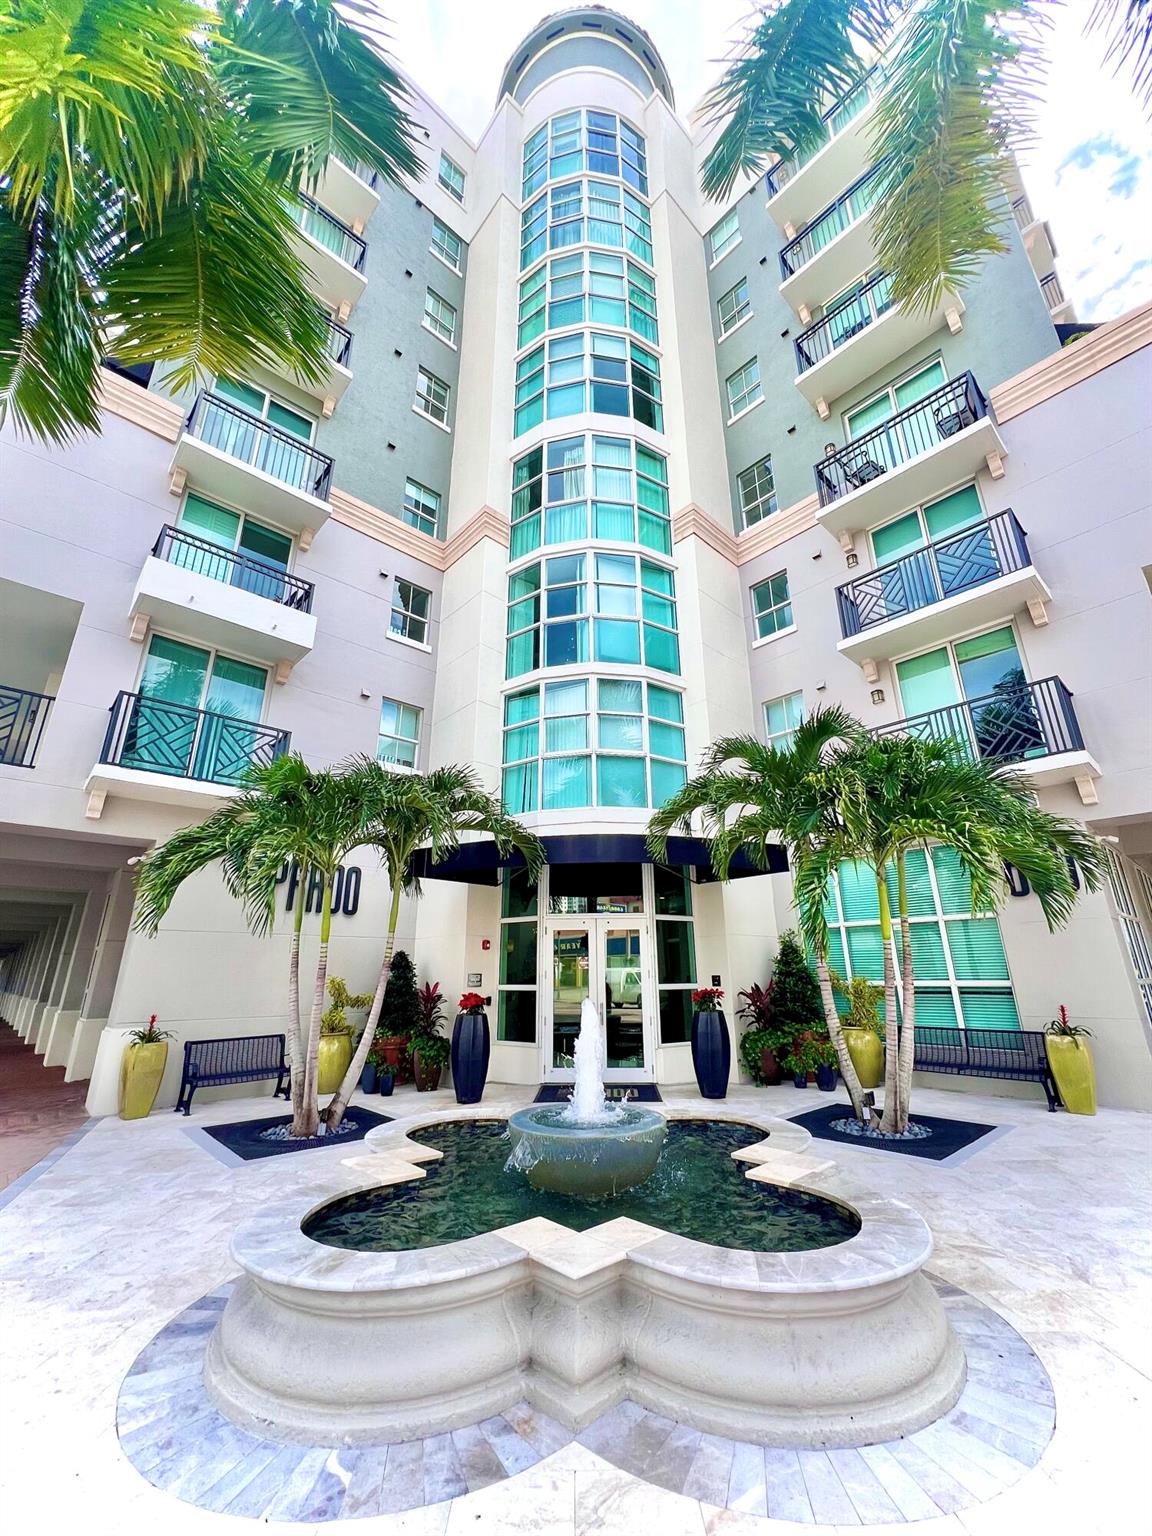 Be in the heart of downtown West Palm Beach in this move-in ready renovated 2 bedroom 2 bath condo comes FULLY FURNISHED and TURNKEY. This unit is located on the 5th floor steps away from The Prado pool, jacuzzi-tub, steam room, courtyard, new fitness center, and new club house. Unit comes with 1 assigned parking space in the garage located inside the building. Just 1 block from the intracoastal waterfront, 2 blocks to Rosemary Square and the Brightline Station, and a few short blocks to Historic Clematis St. Just a 10 minute drive to PBI airport. Quick access to Ft. Lauderdale and Miami. *Investors* There is no waiting period to rent out. The leases can be a minimum of 30 days or more.